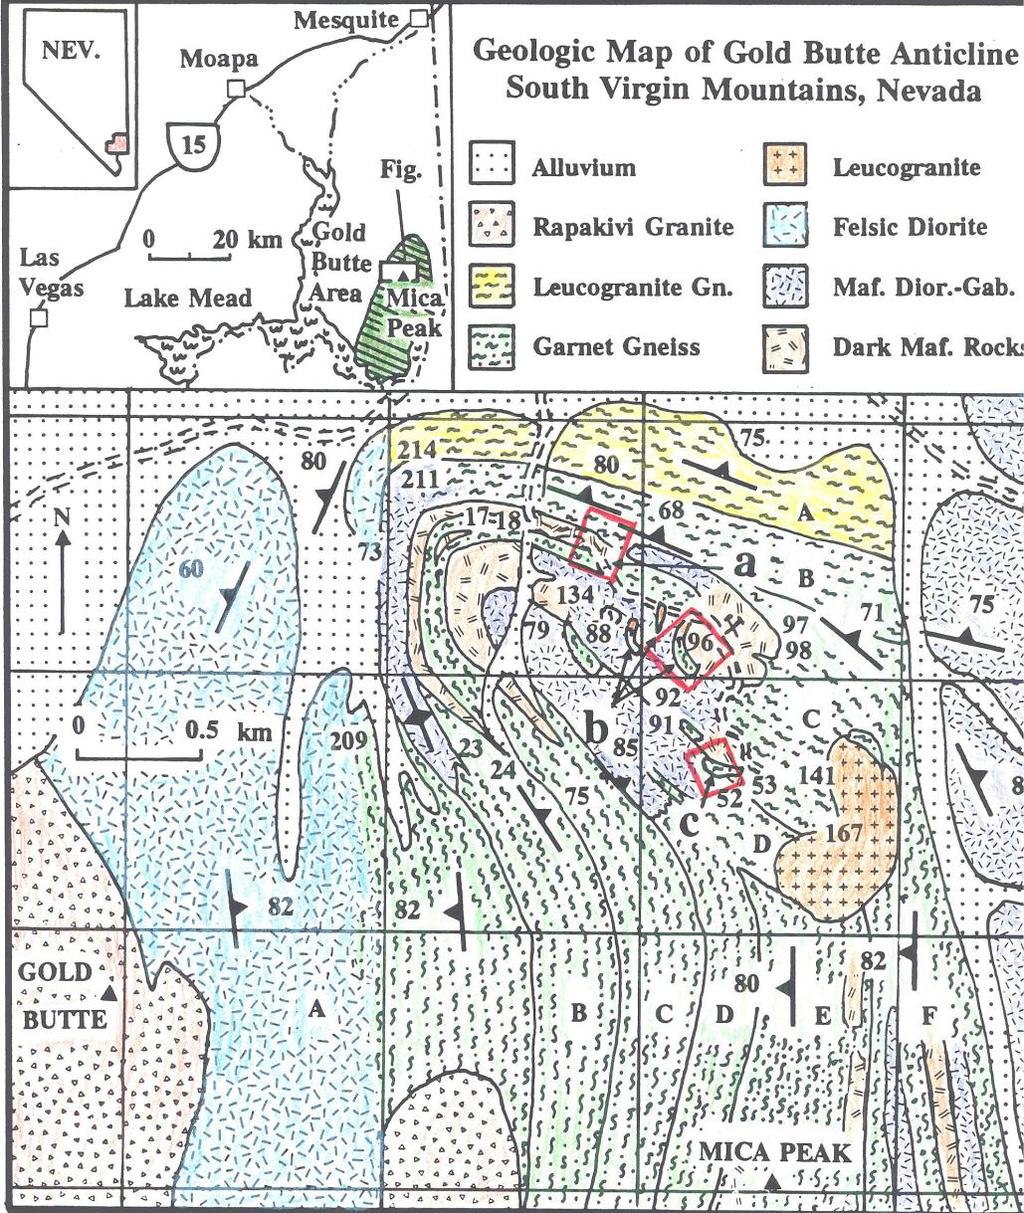 Fig. 1. Location of Precambrian Gold Butte area, Nevada, and geologic map of Gold Butte anticline. Mine symbol locates vermiculite mine.